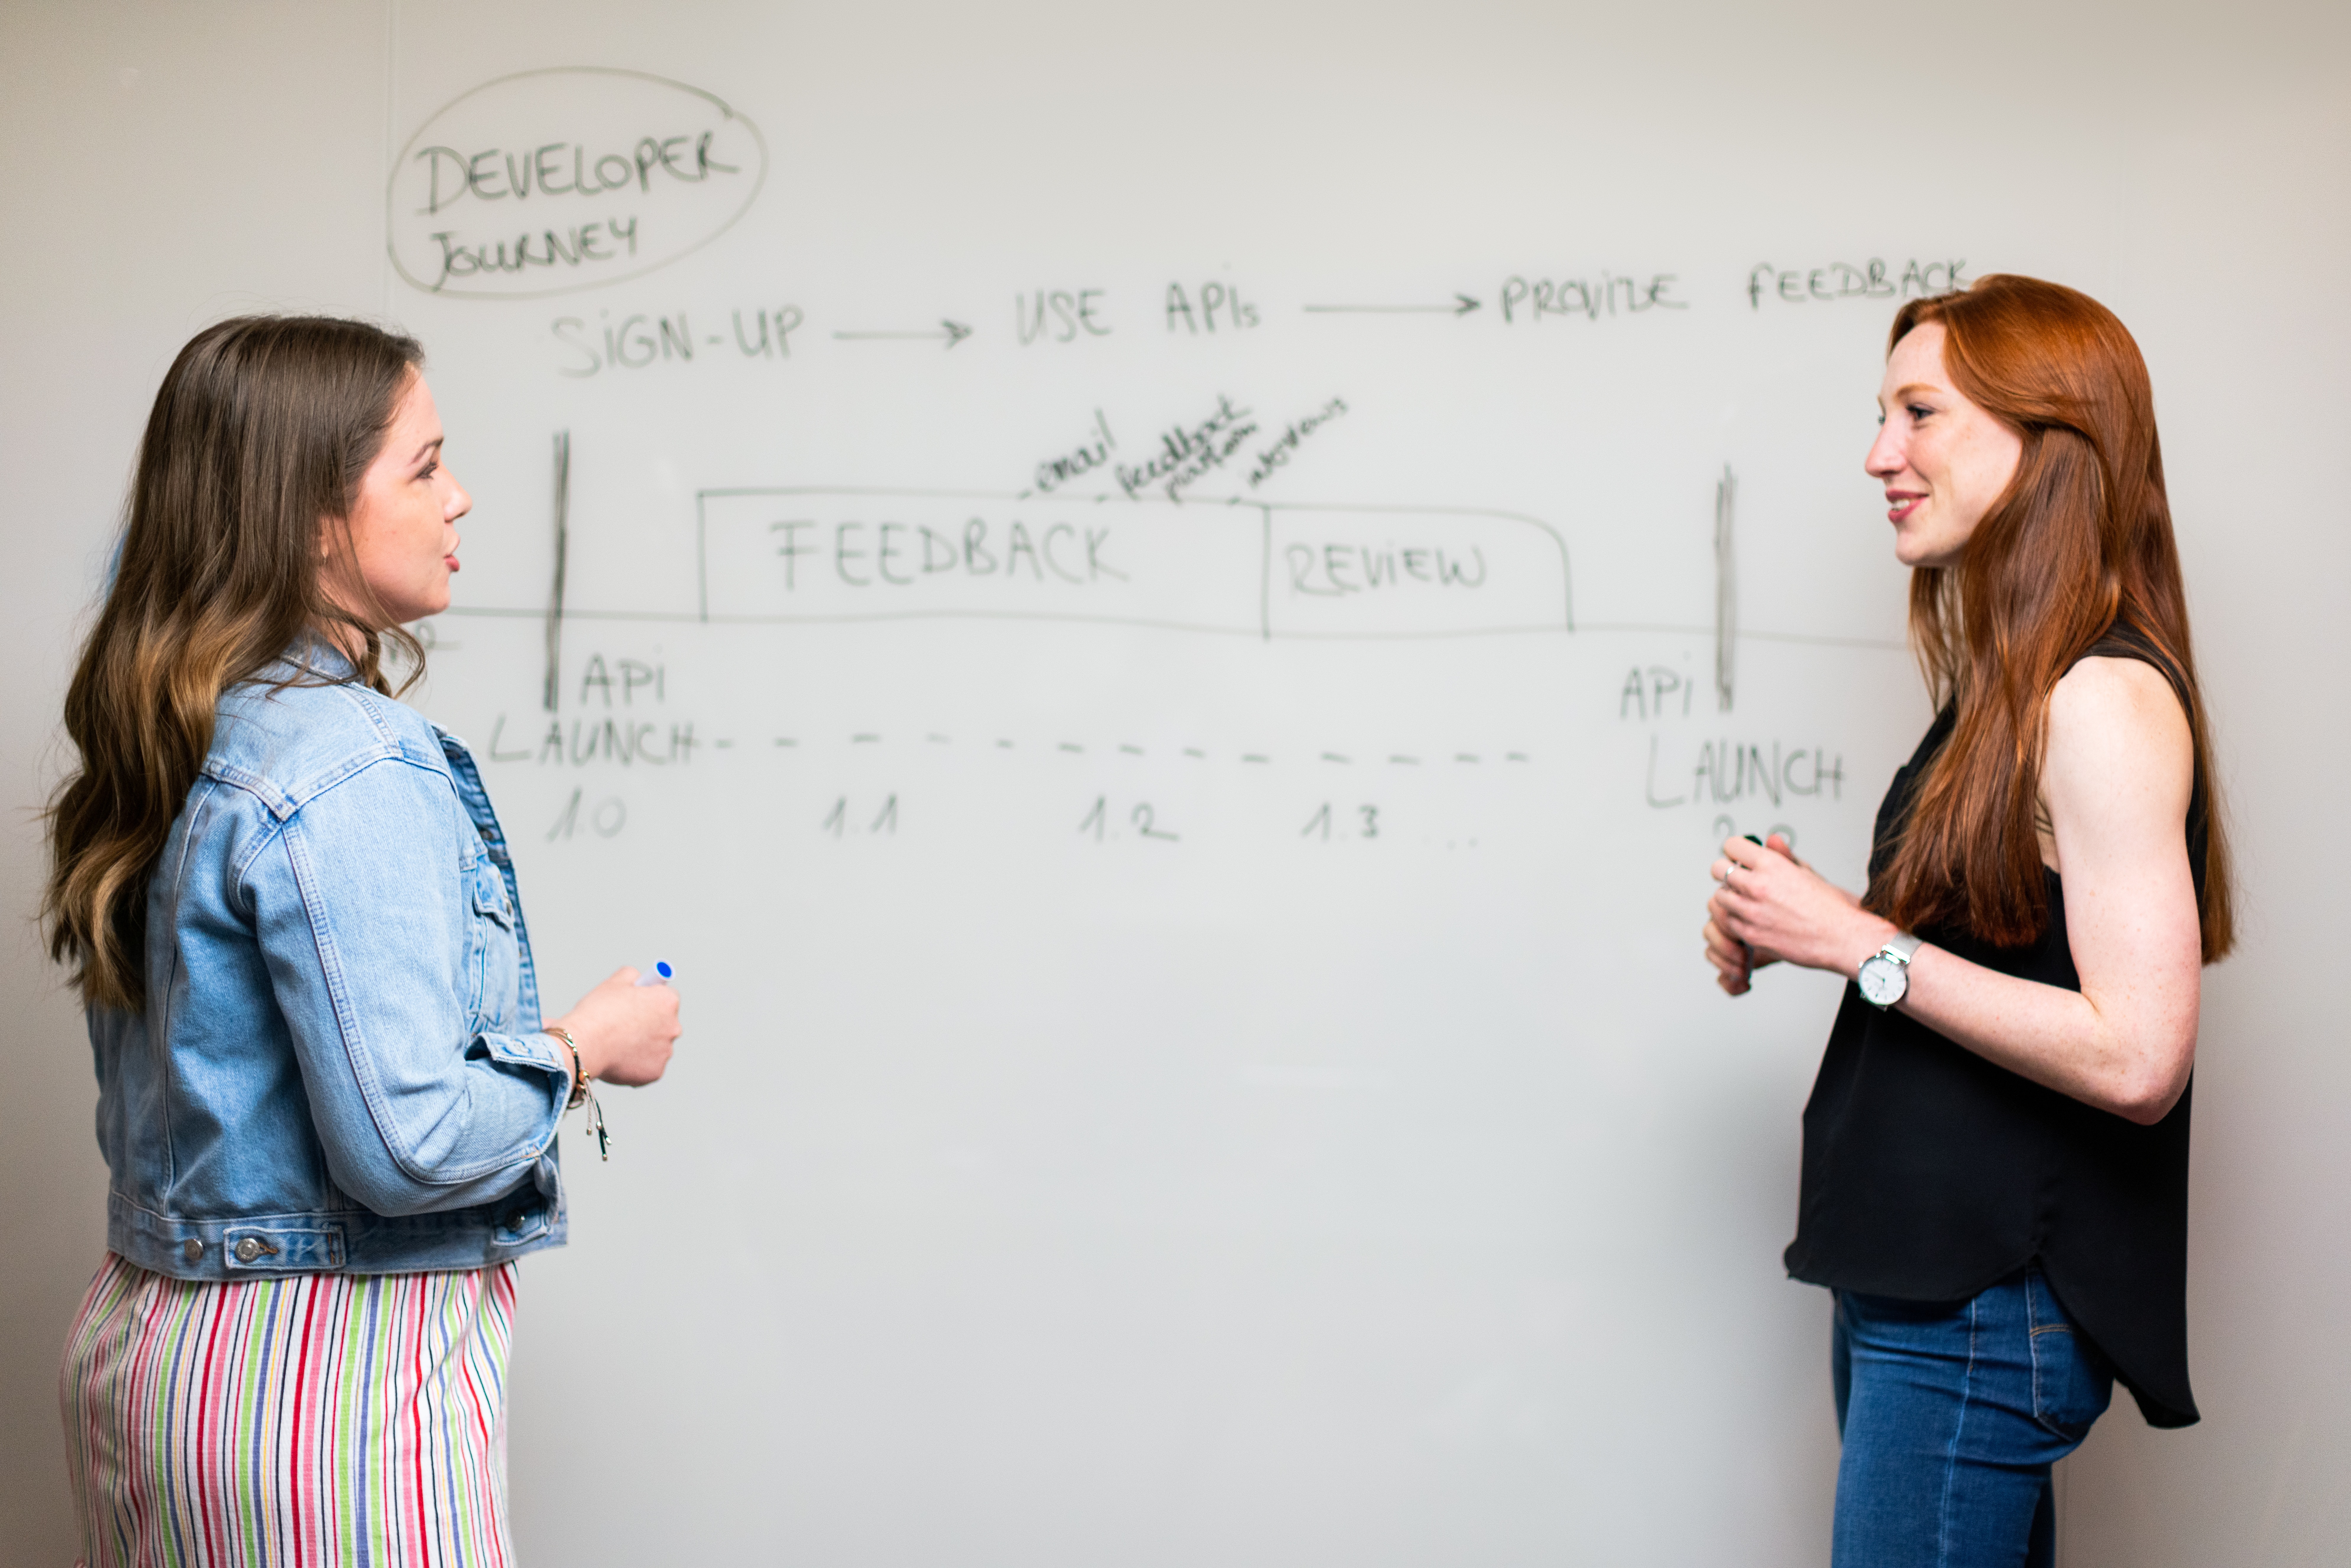 Two female students talking in front of a white board